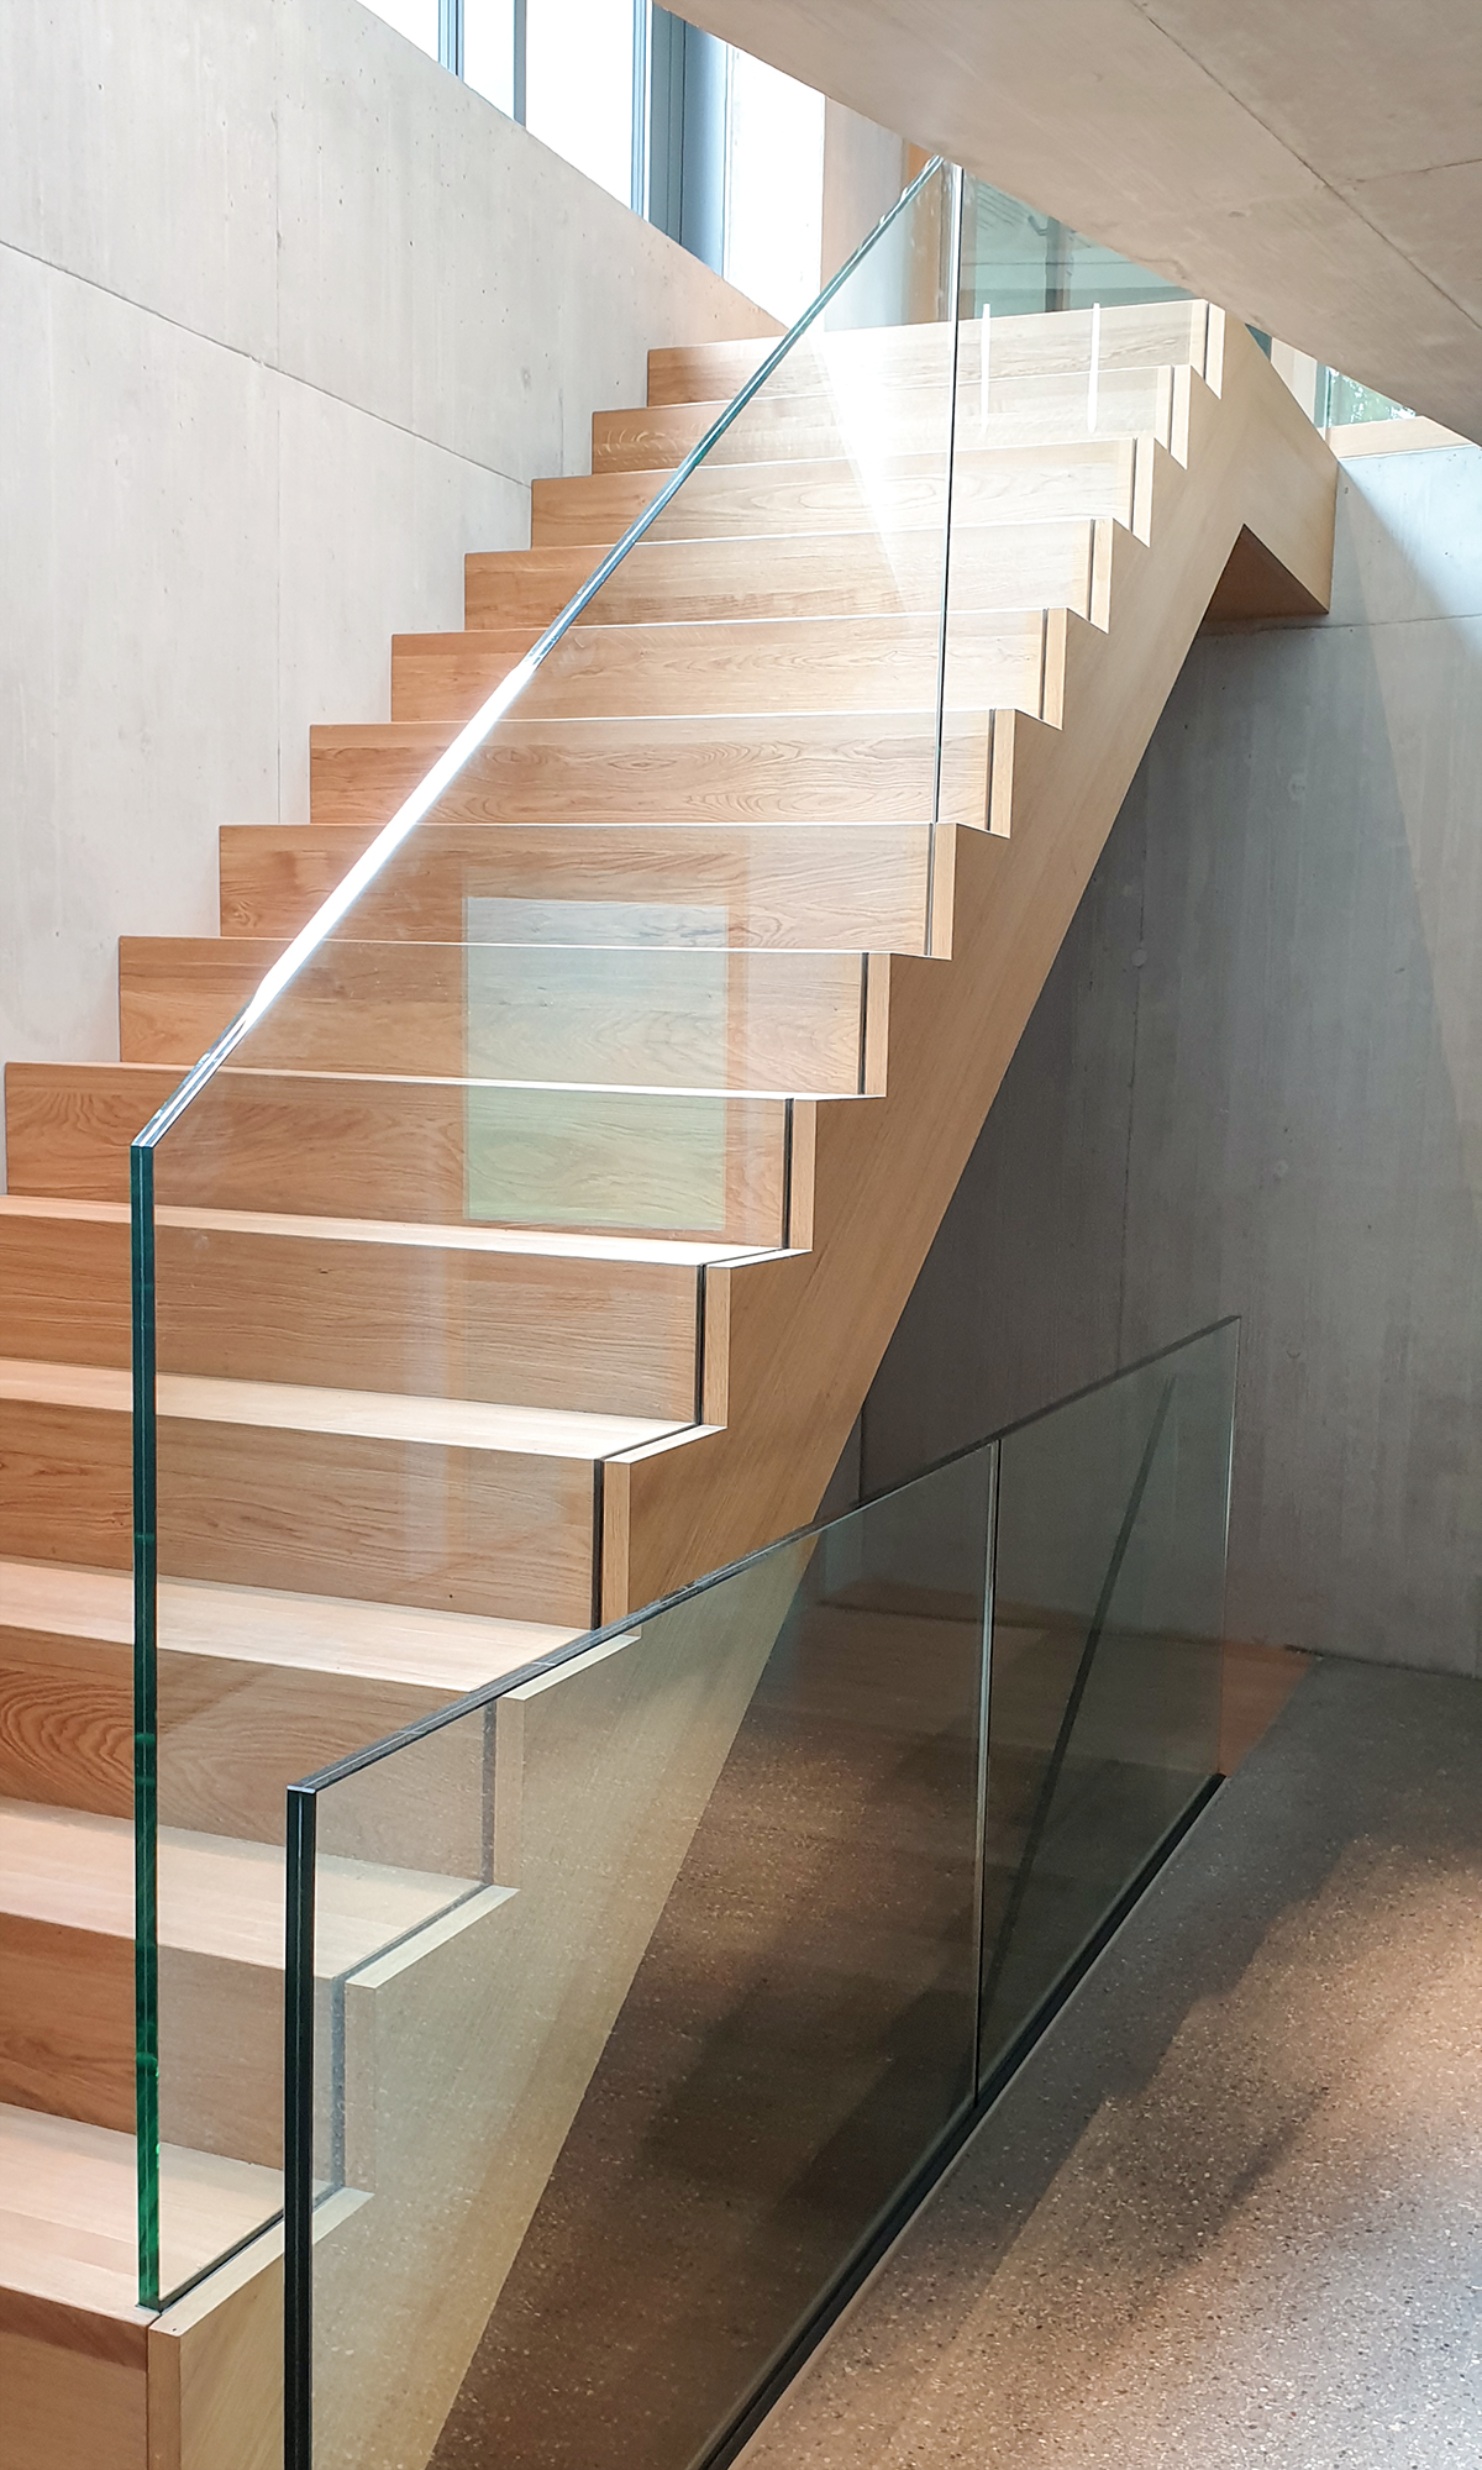 Sleek staircase with wooden steps and glass balustrade connects the basement level to the ground floor.<br/><br/>